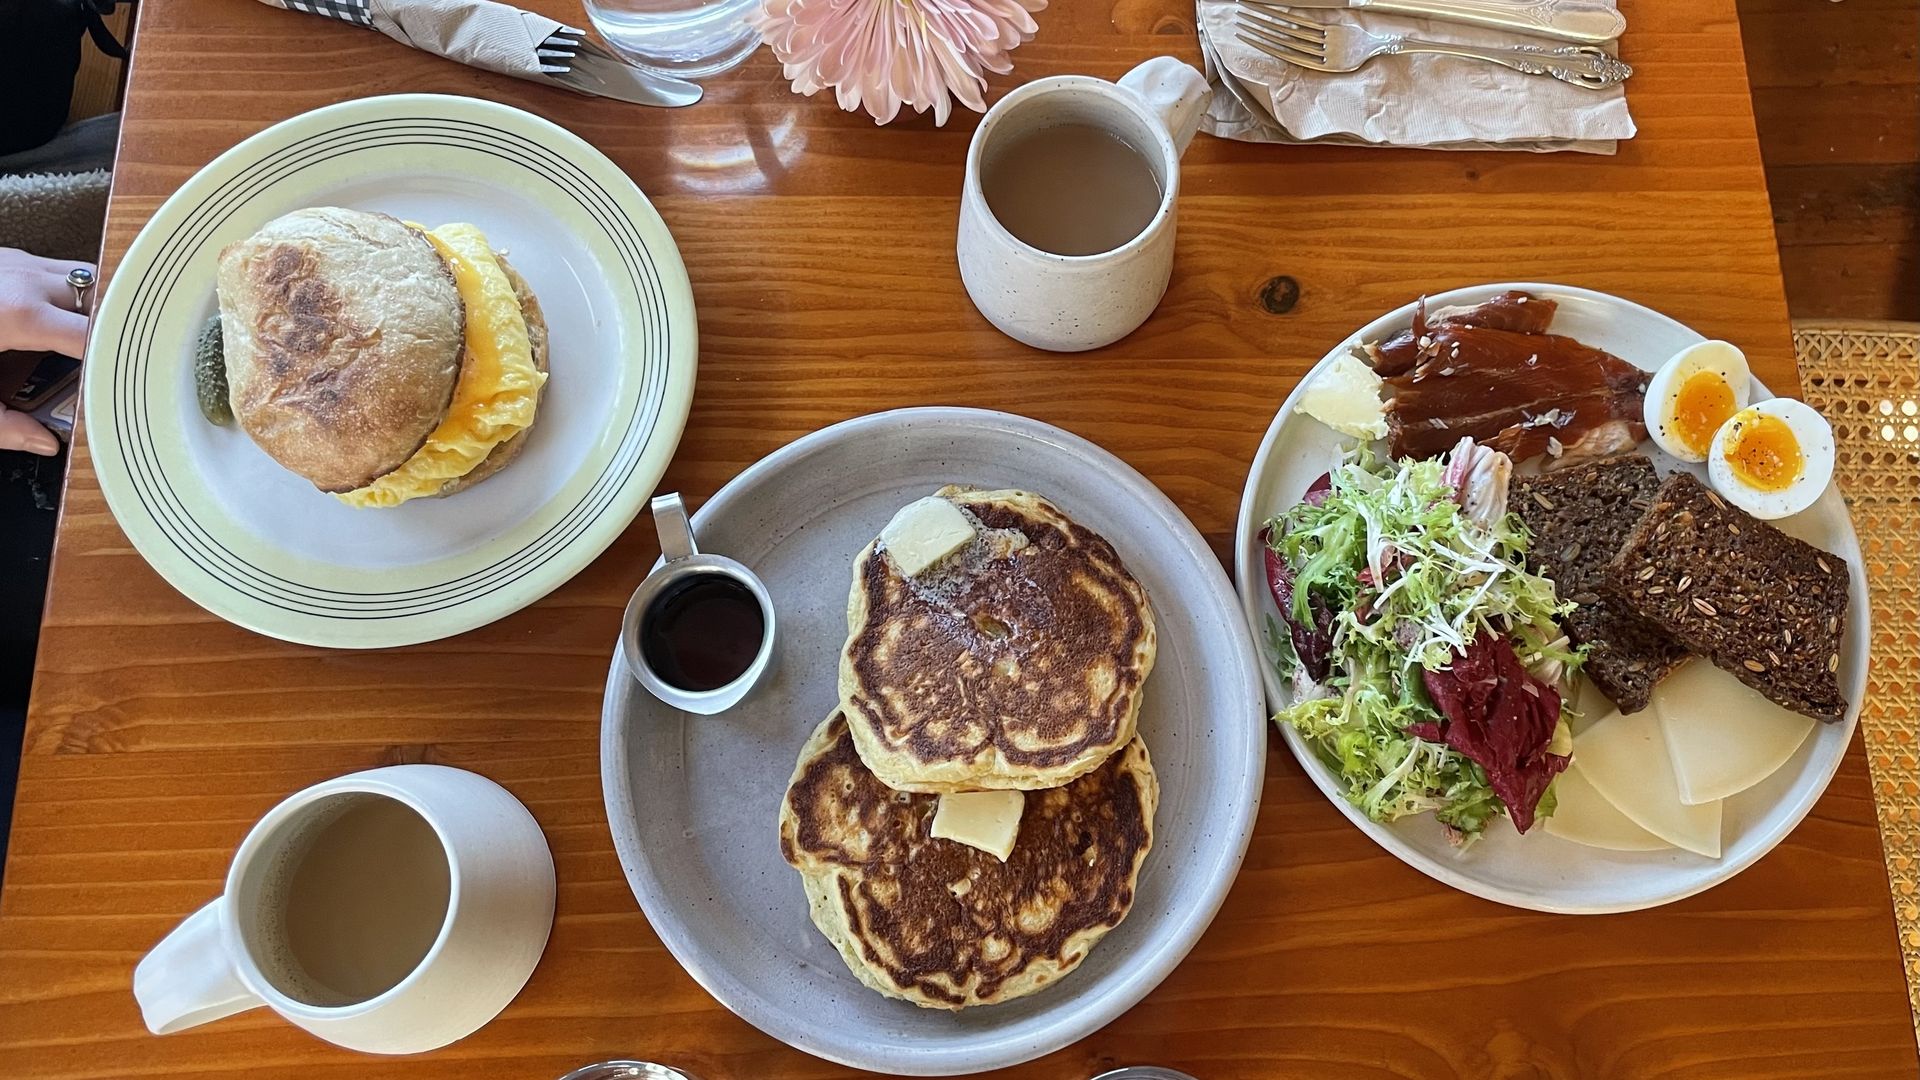 An image of a table with three plates on it, including a plate of pancakes and two coffee cups.